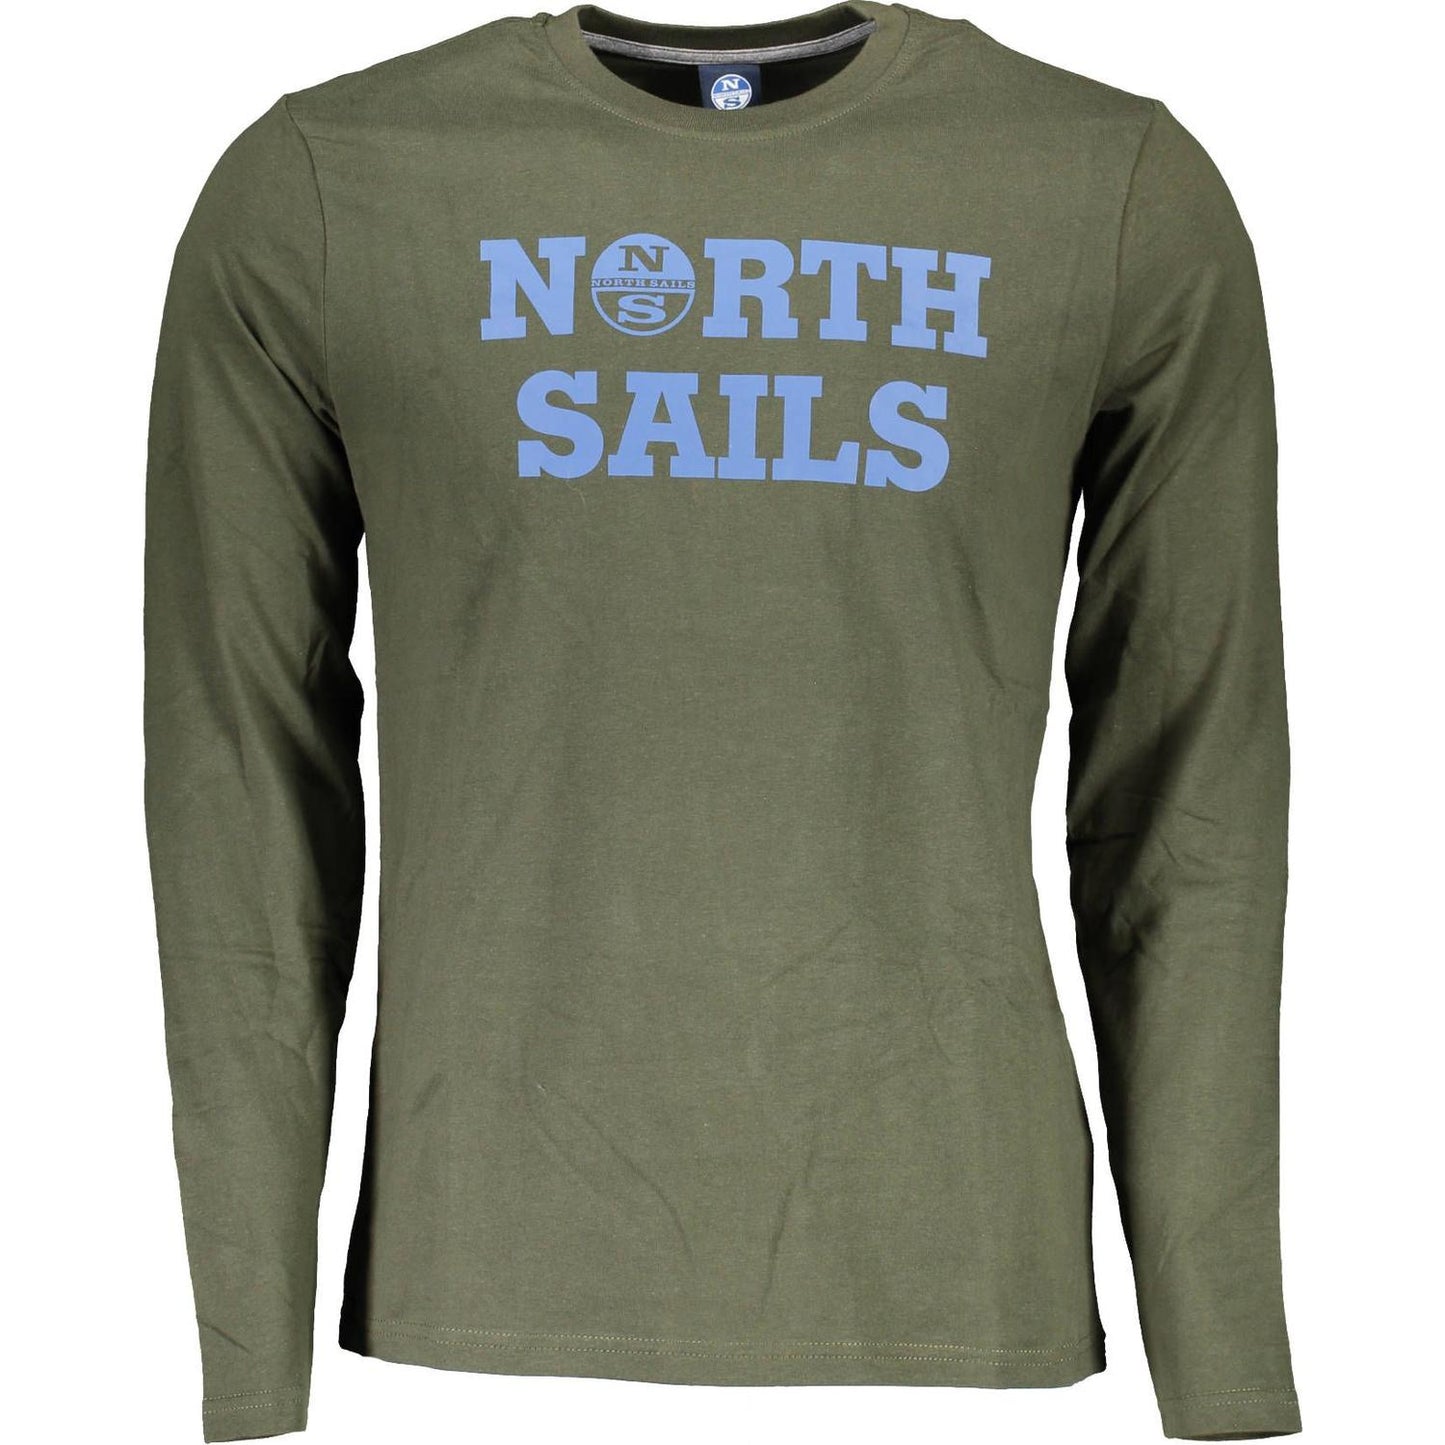 North Sails Chic Green Long Sleeve Cotton Tee chic-green-long-sleeve-cotton-tee